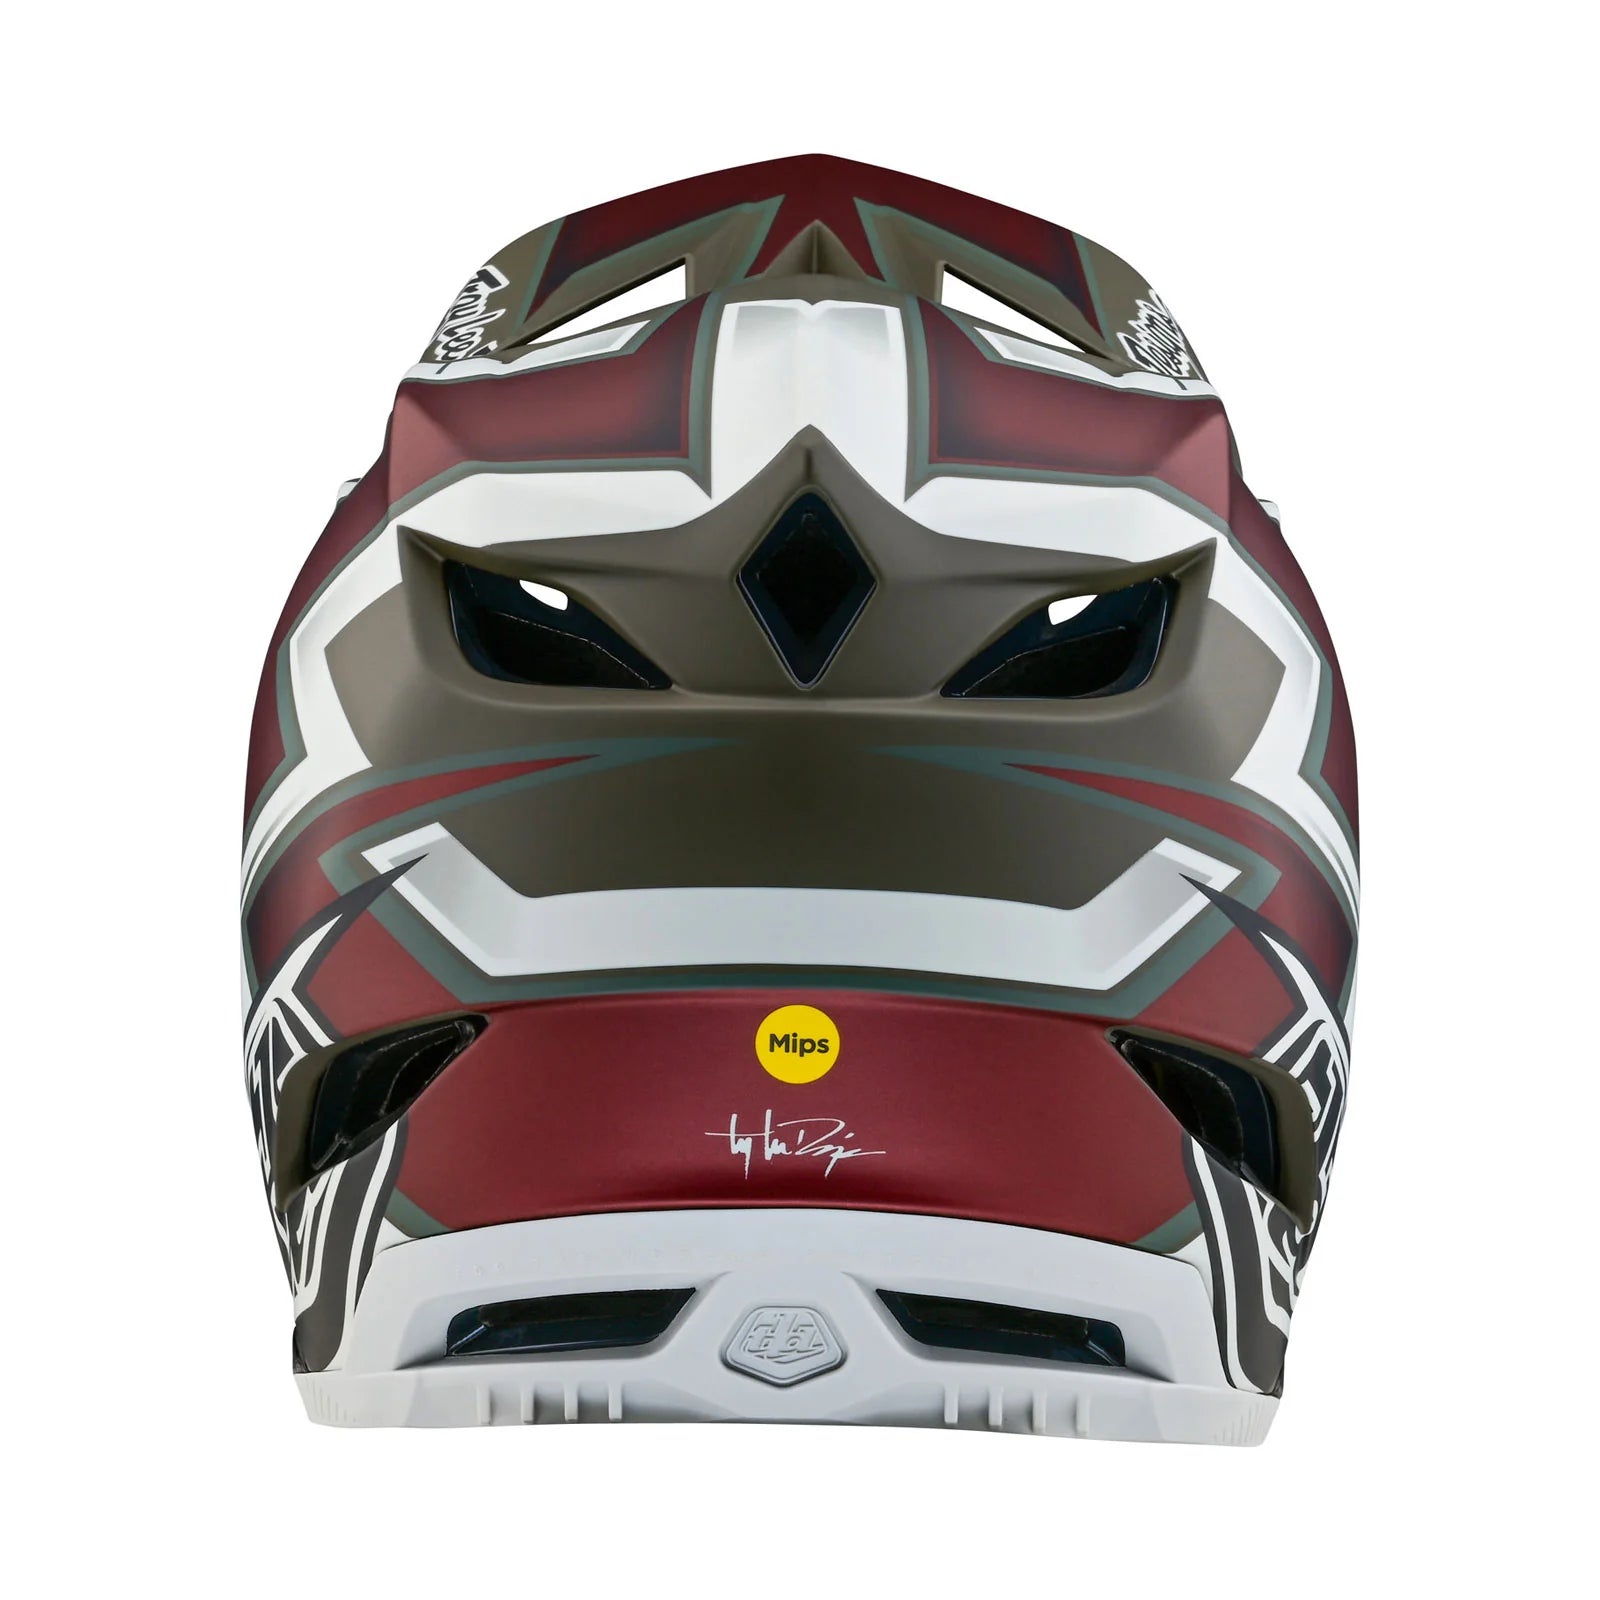 A TLD D4 AS Composite Helmet W/MIPS Ever Tarmac with a red and white design for enhanced safety.